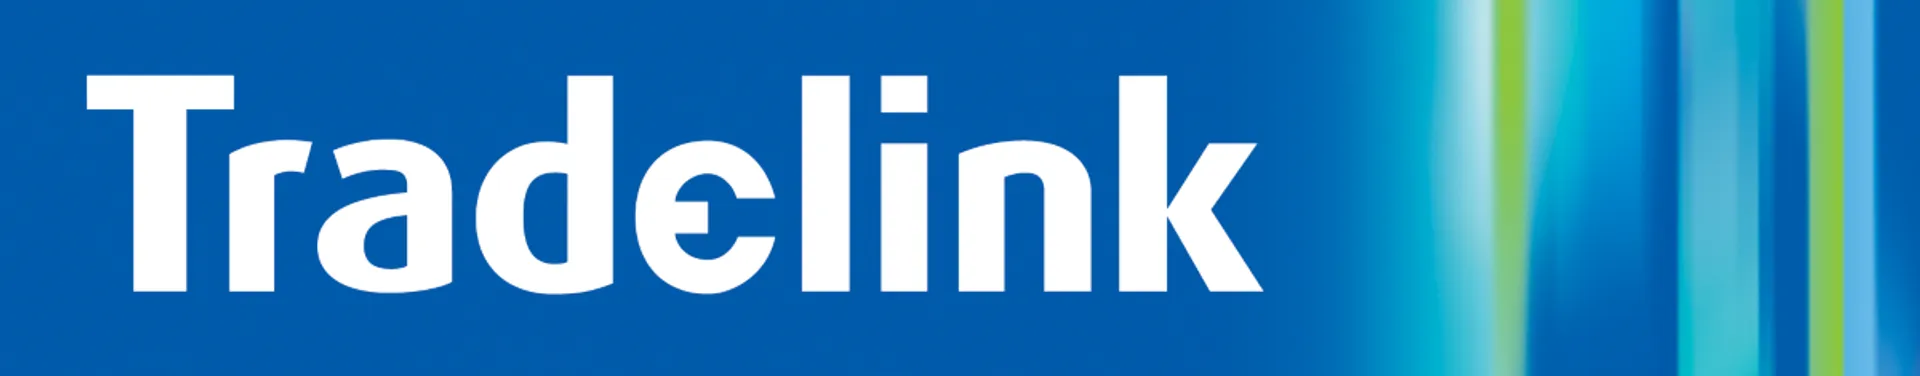 TRADELINK logo of current catalogue